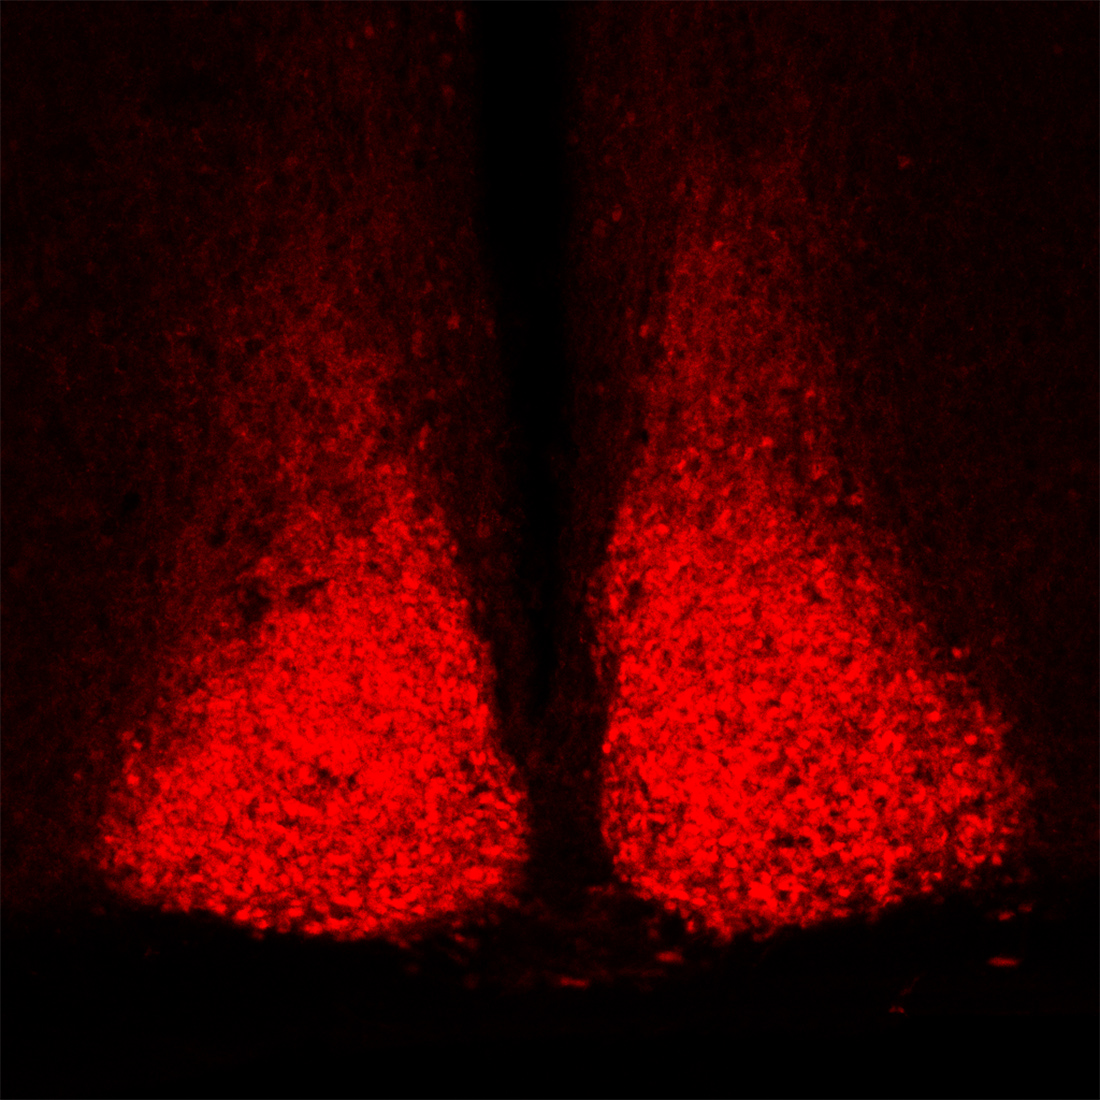 Microscopic image of the mouse suprachiasmatic nucleus, the brain region responsible for controlling circadian rhythms.